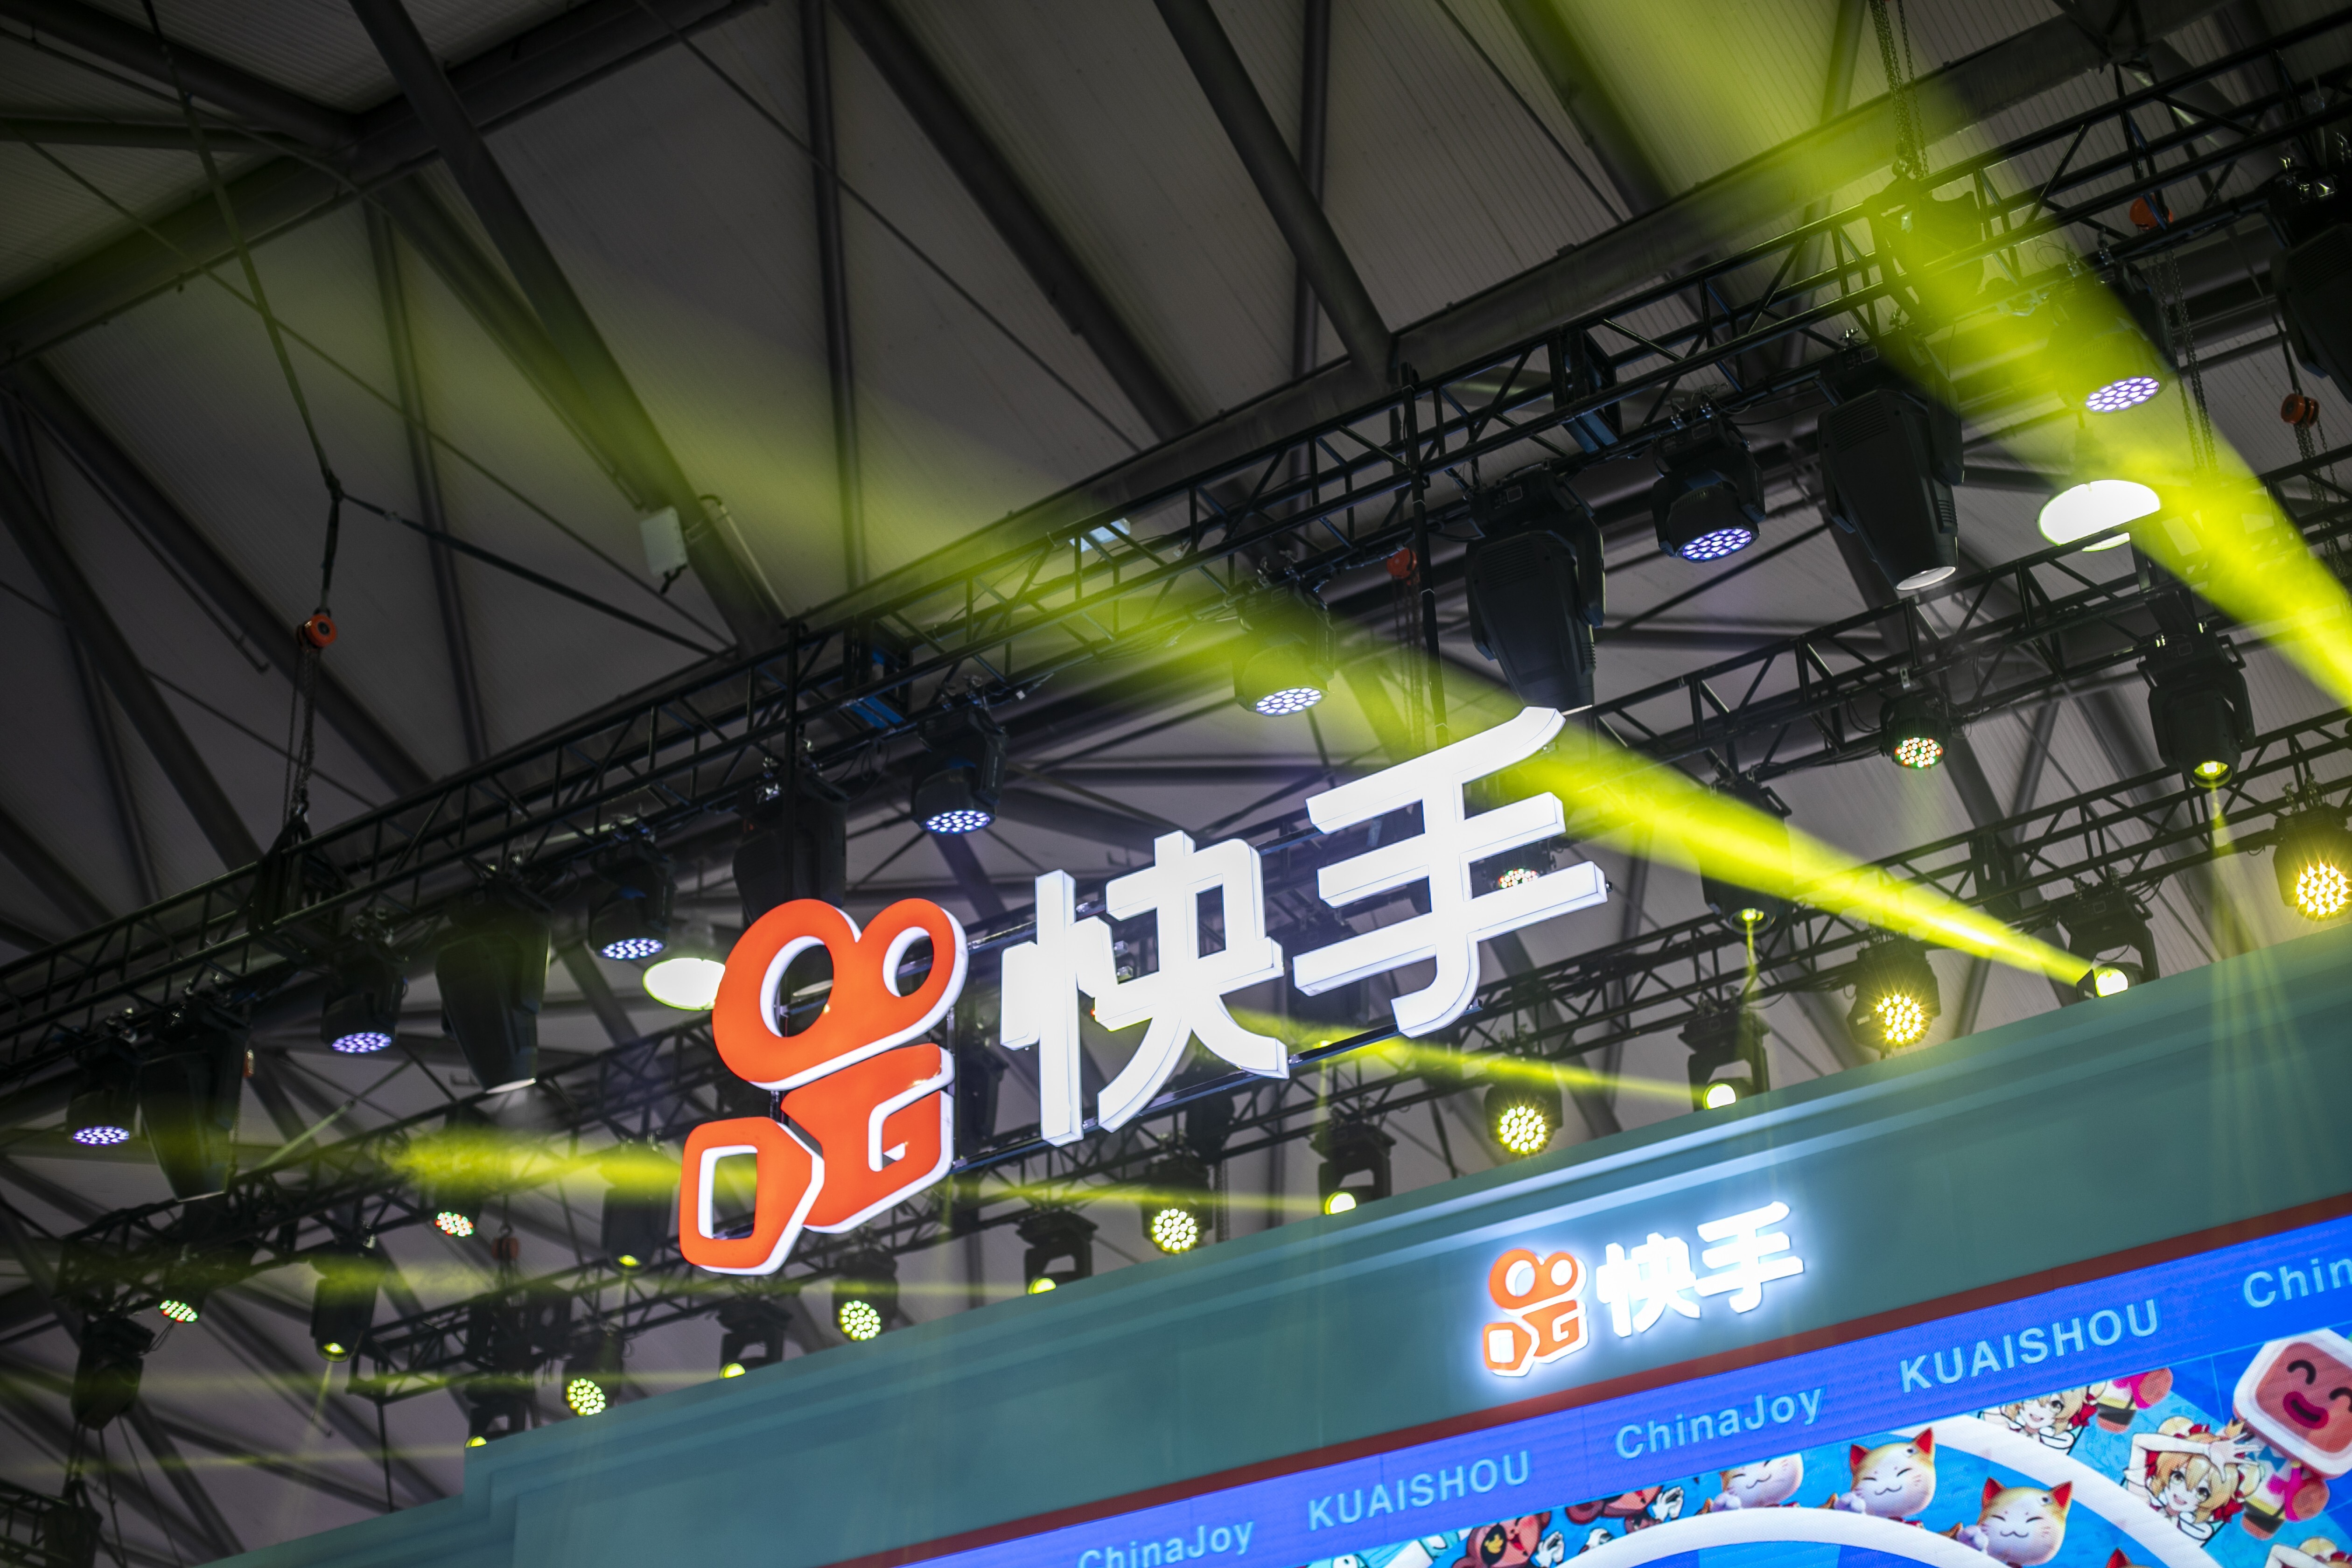 Kuaishou’s stand at the Shanghai New International Expo Center on July 30 in Shanghai, China. Photo: Getty Images